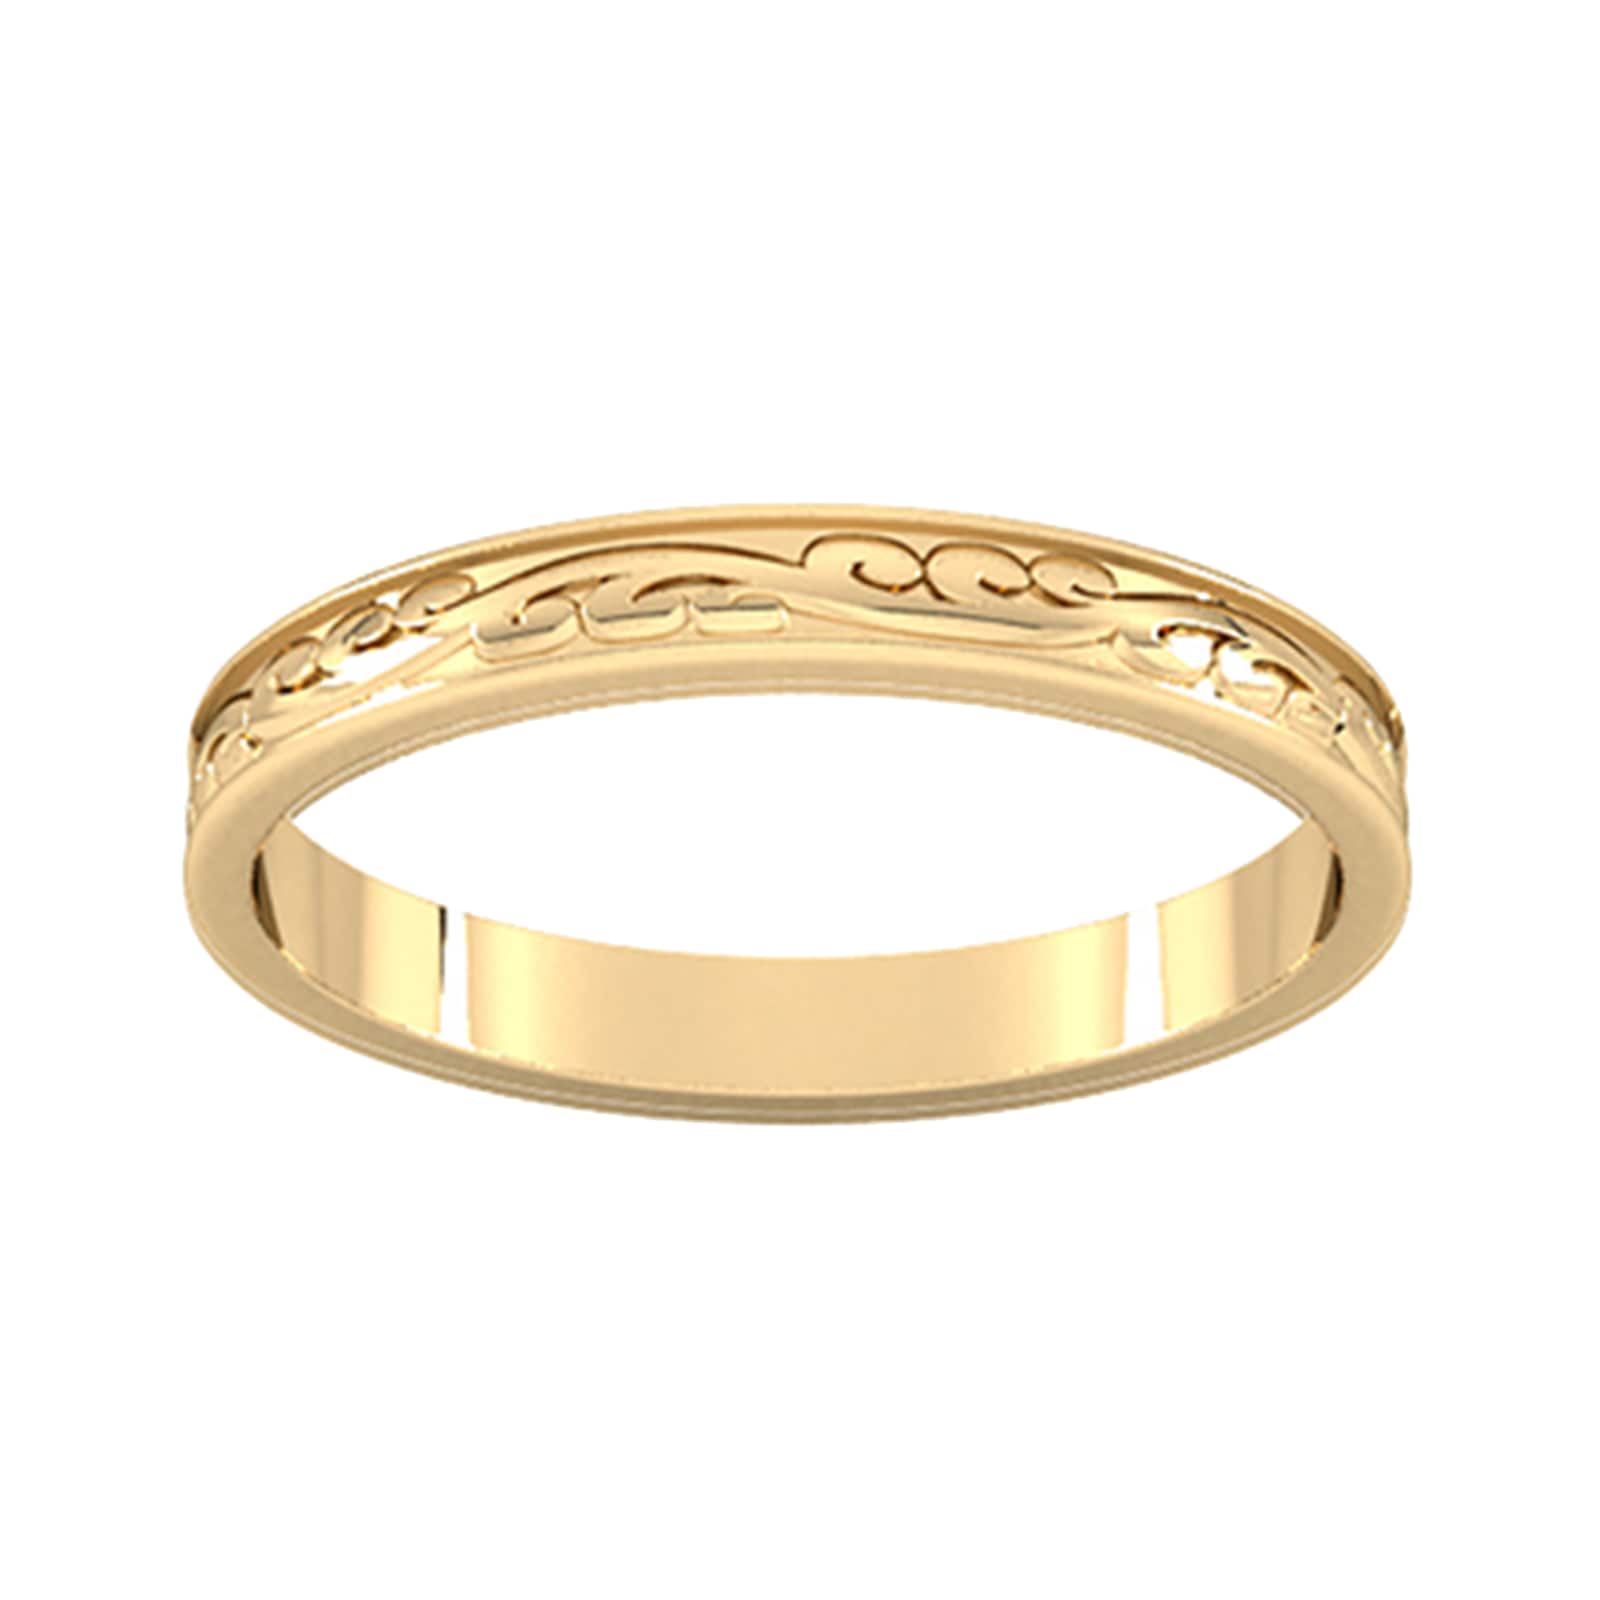 2.5mm Hand Engraved Wedding Ring In 18 Carat Yellow Gold - Ring Size U